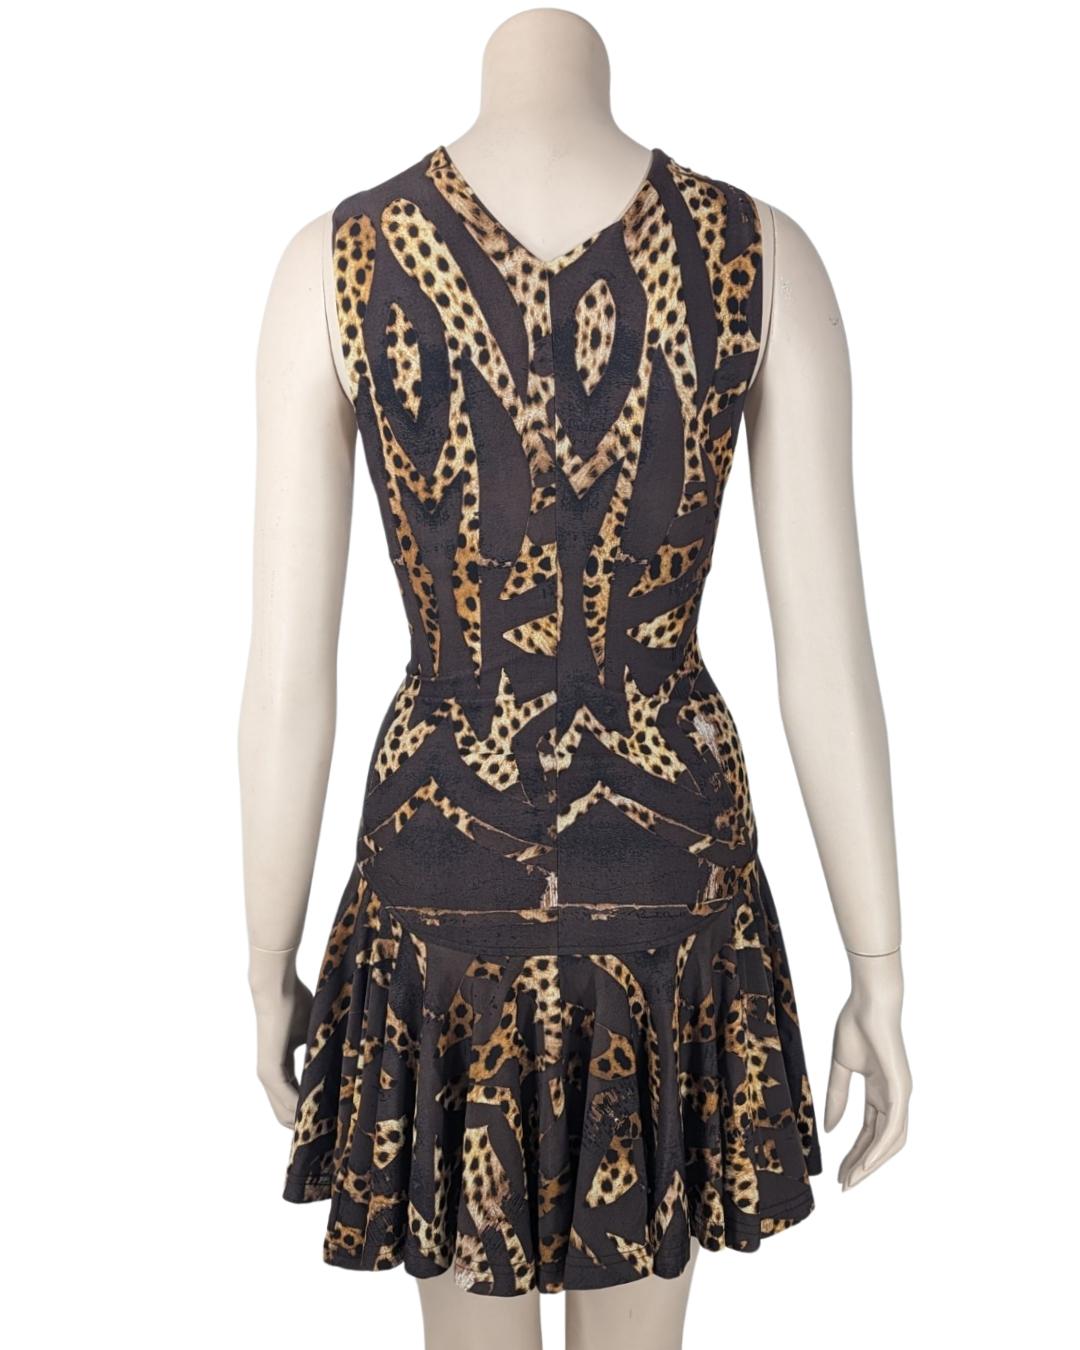 Women's Roberto Cavalli Floral Graphic and Animal Halter Mini Dress For Sale